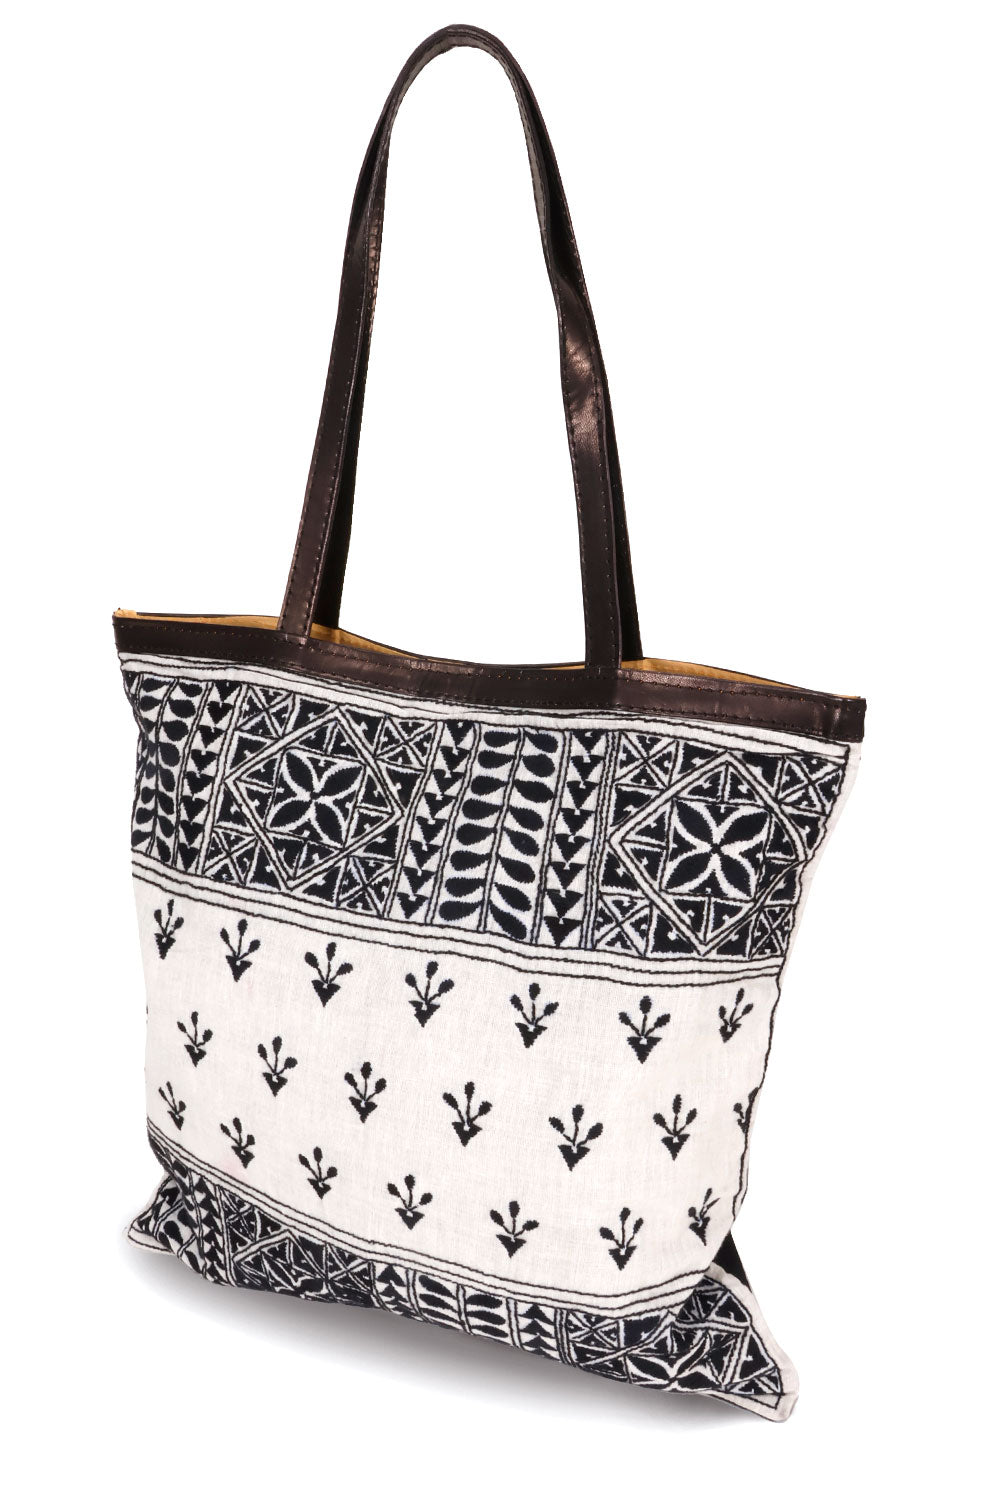 White Kantha Embroidery Tote Bag 10063537